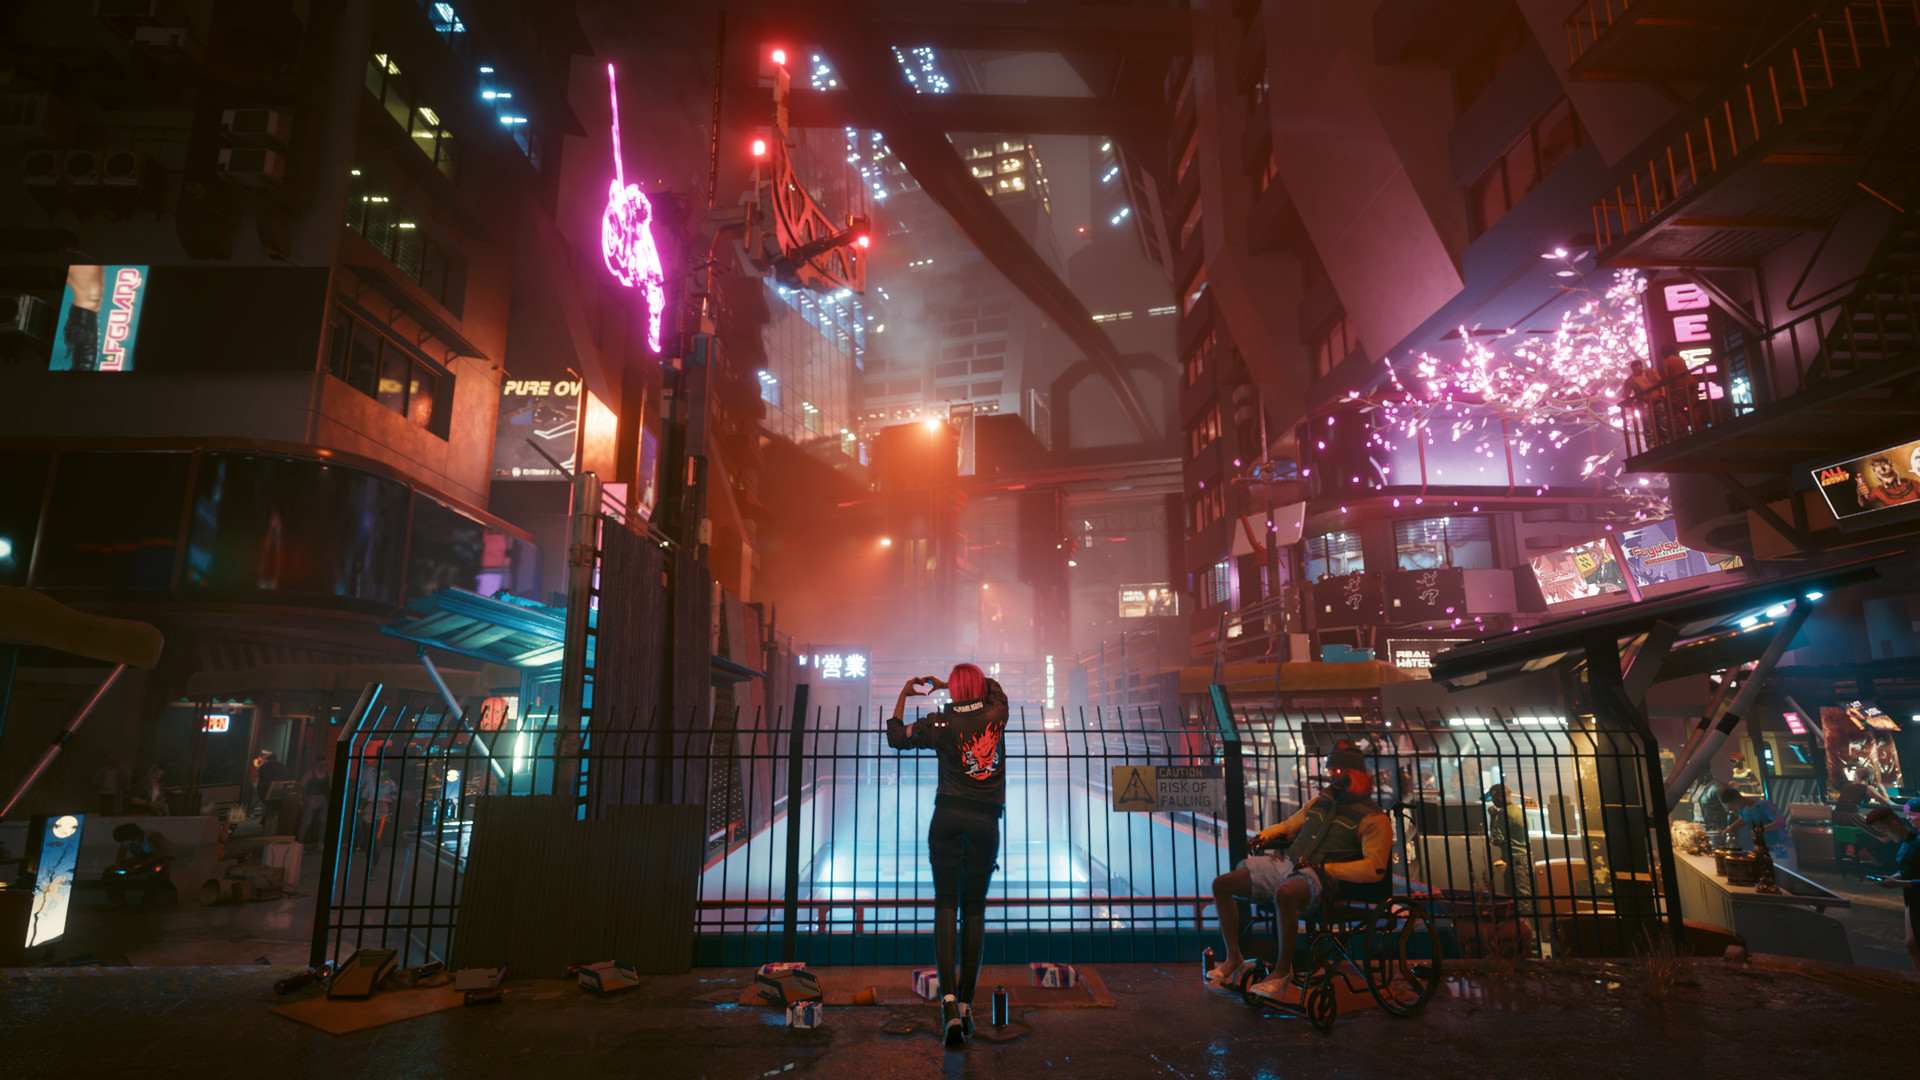 Cyberpunk 2077 expansion is still coming in 2023